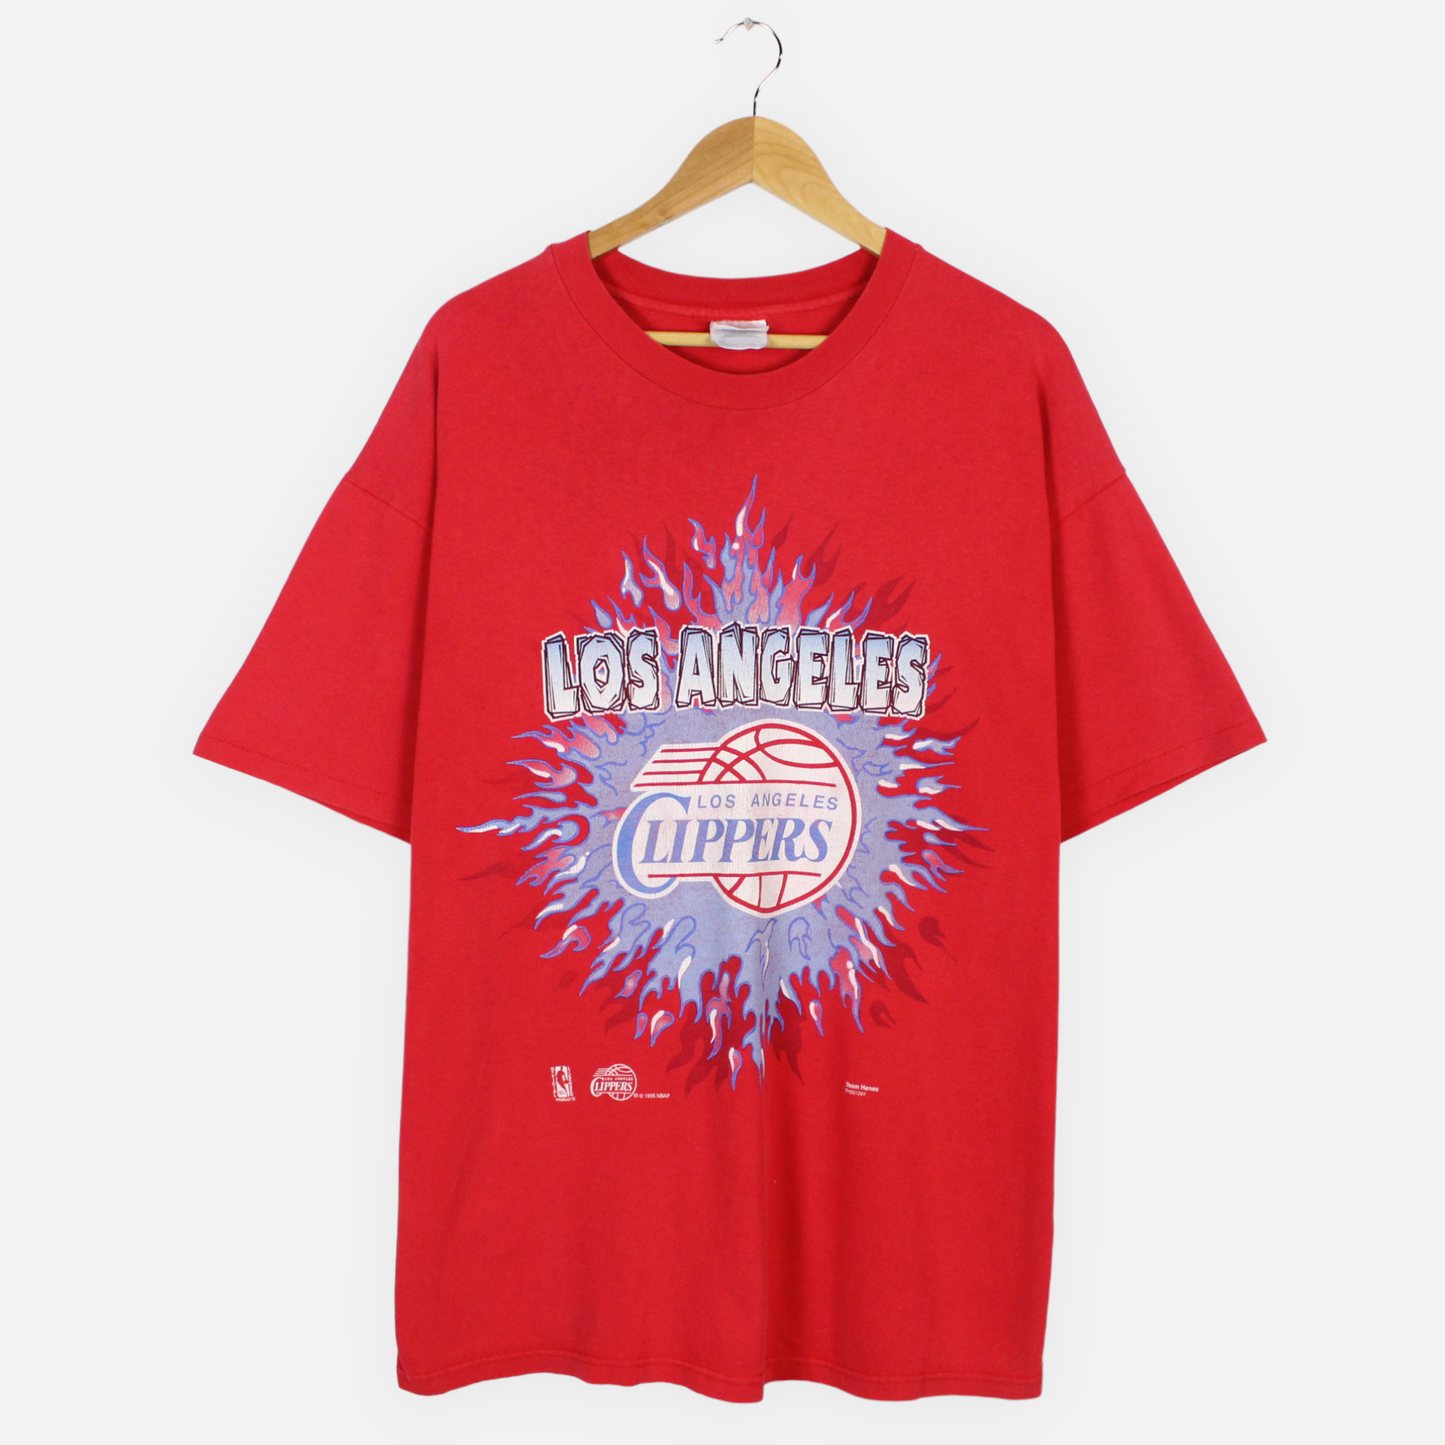 Vintage 1994 Los Angeles Clippers NBA Tee - XL